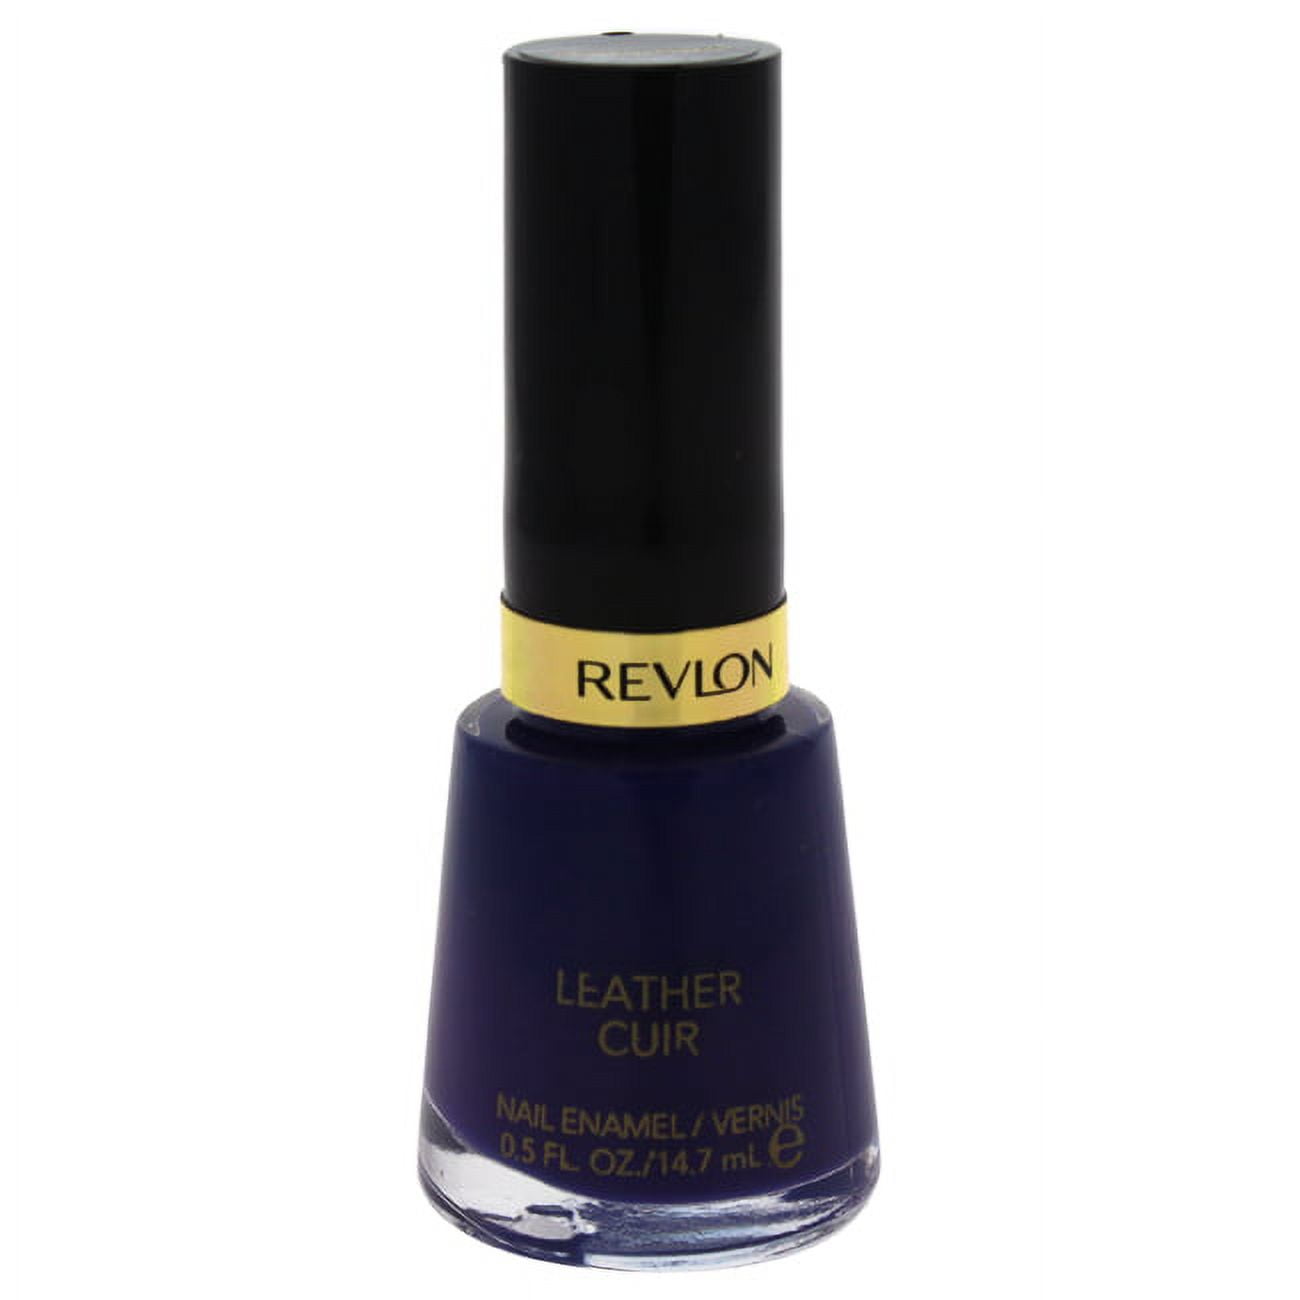 Leather Cuir Nail Enamel Downtown by Revlon for Women 0 5 oz Nail Polish 86291577 3a56 4cd5 9ee0 d90280c1743f.97b93193437d3f11a5a37d26fe7f58c0